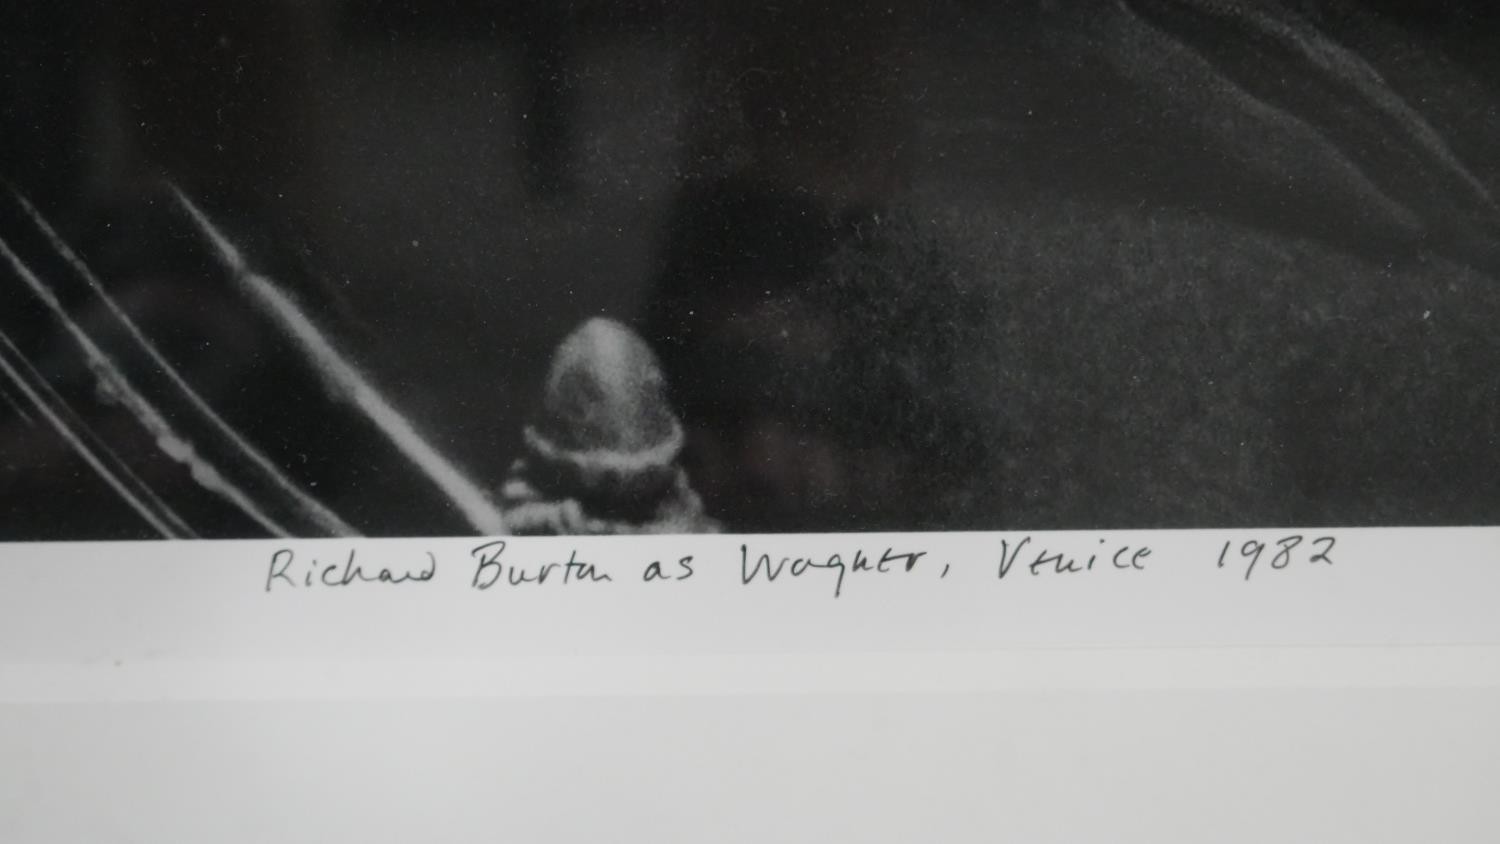 Sarah Quill (b. 1946), photograph of Richard Burton as Wagner in'Wagner', Venice 1982, signed, - Image 5 of 7